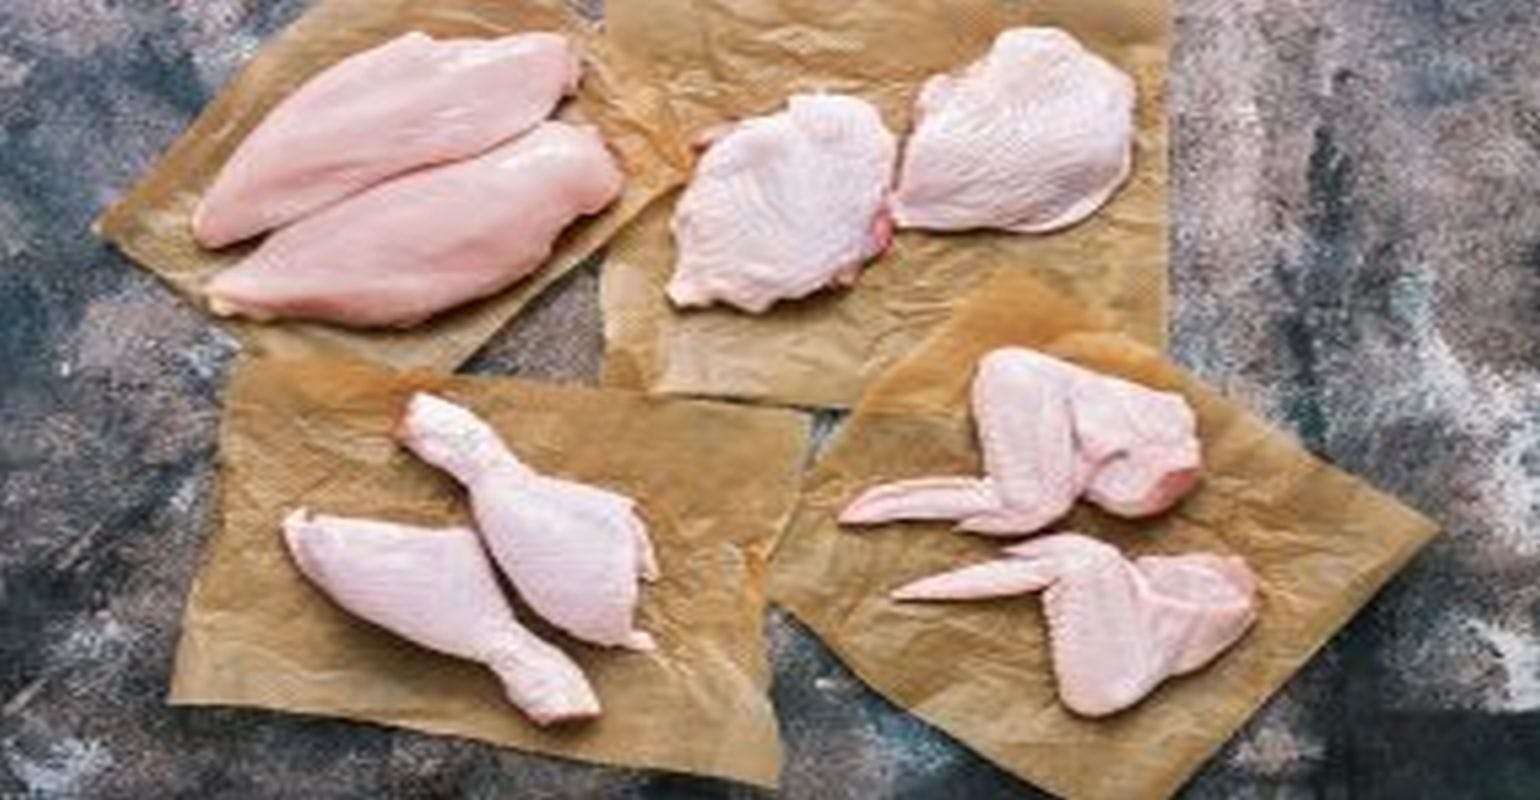 Public Health Authorities Investigating Outbreak of Salmonella Infections Linked to Kosher Chicken